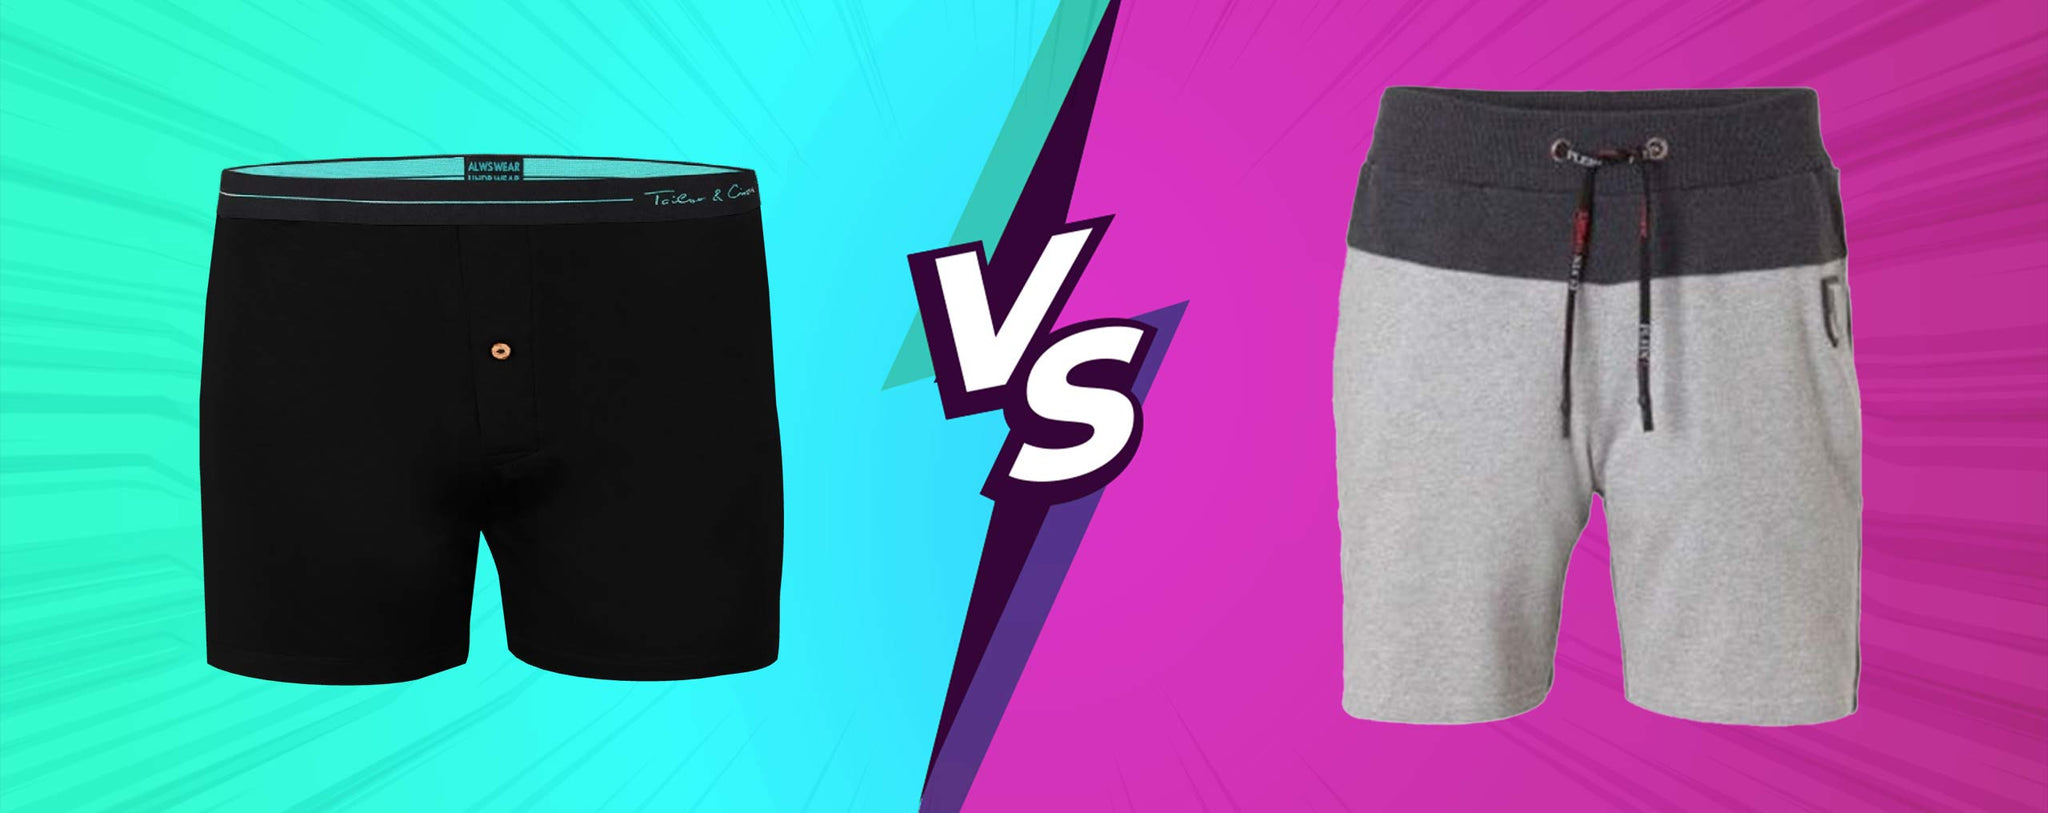 Boxers V/S Shorts: Which Is More Comfortable for Men?